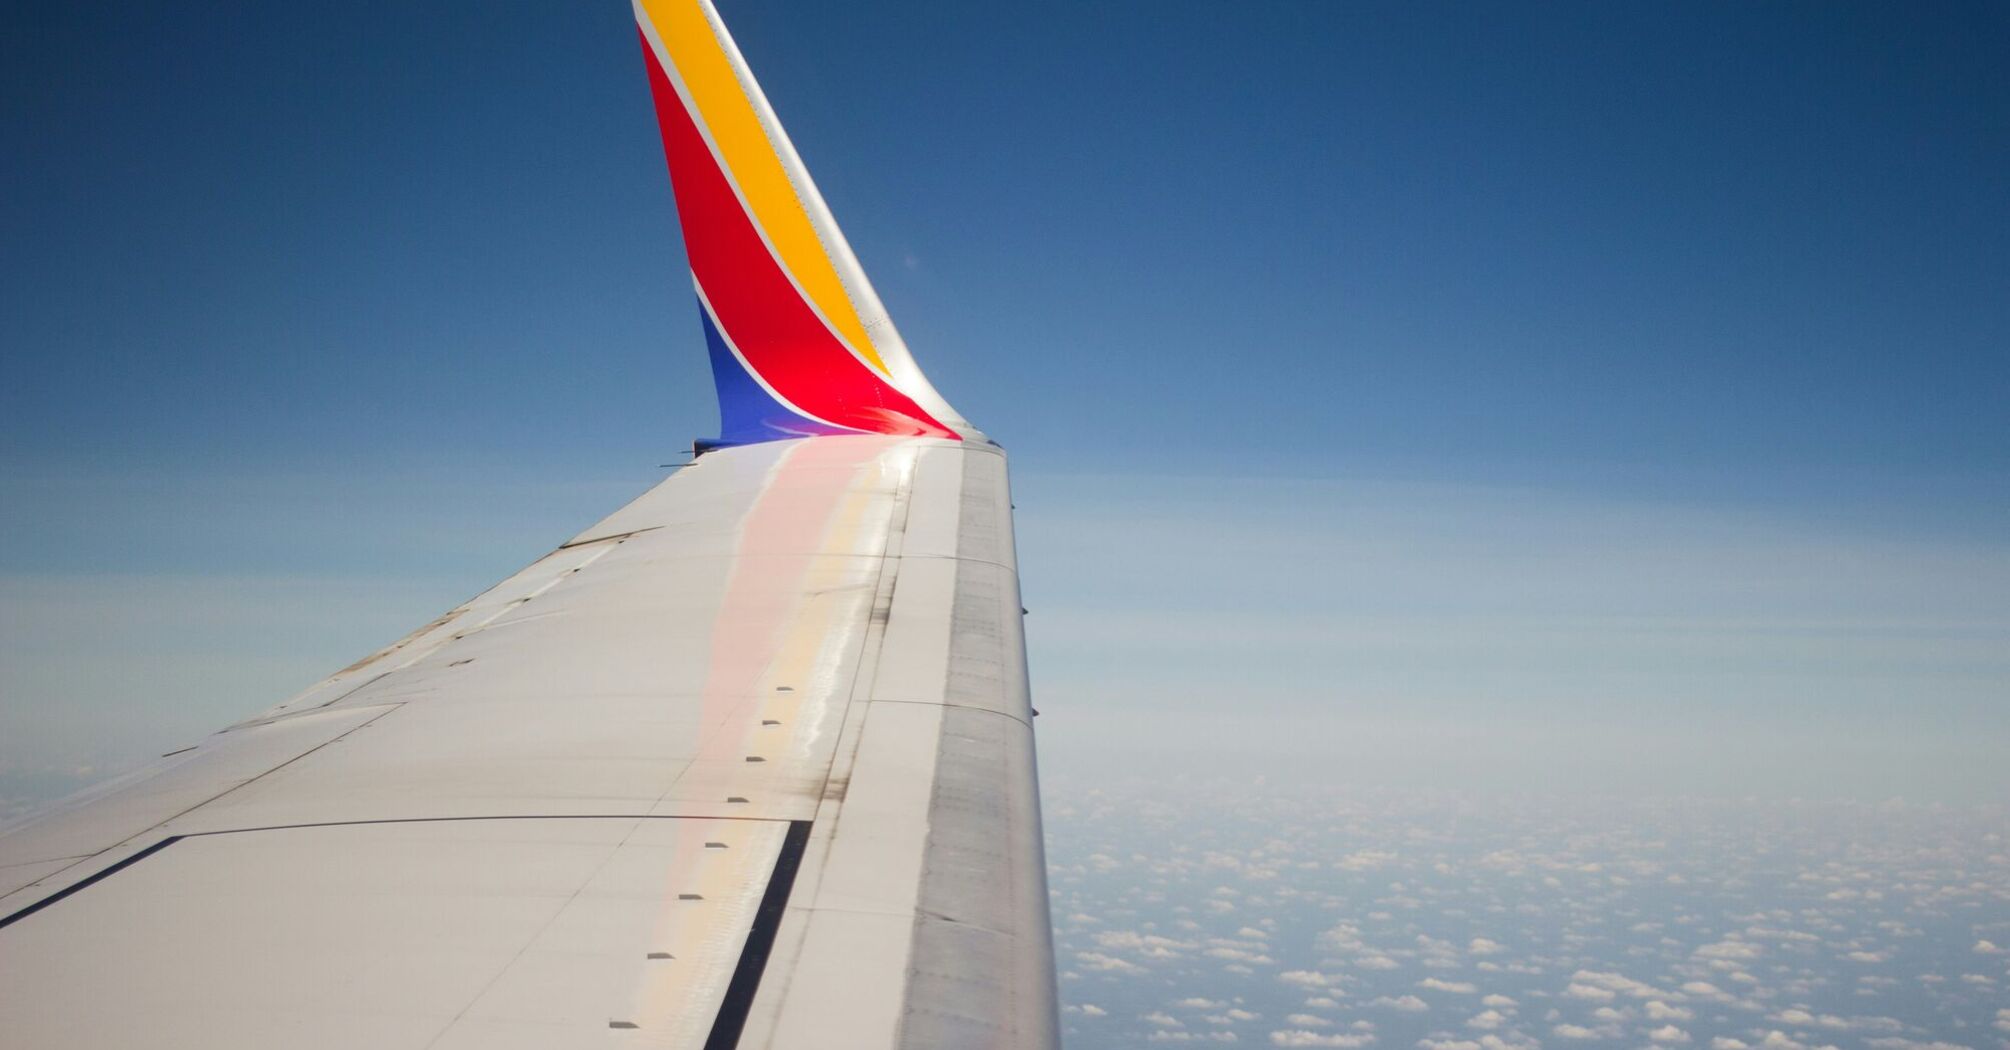 Wing of a Southwest Airlines plane against a clear blue sky